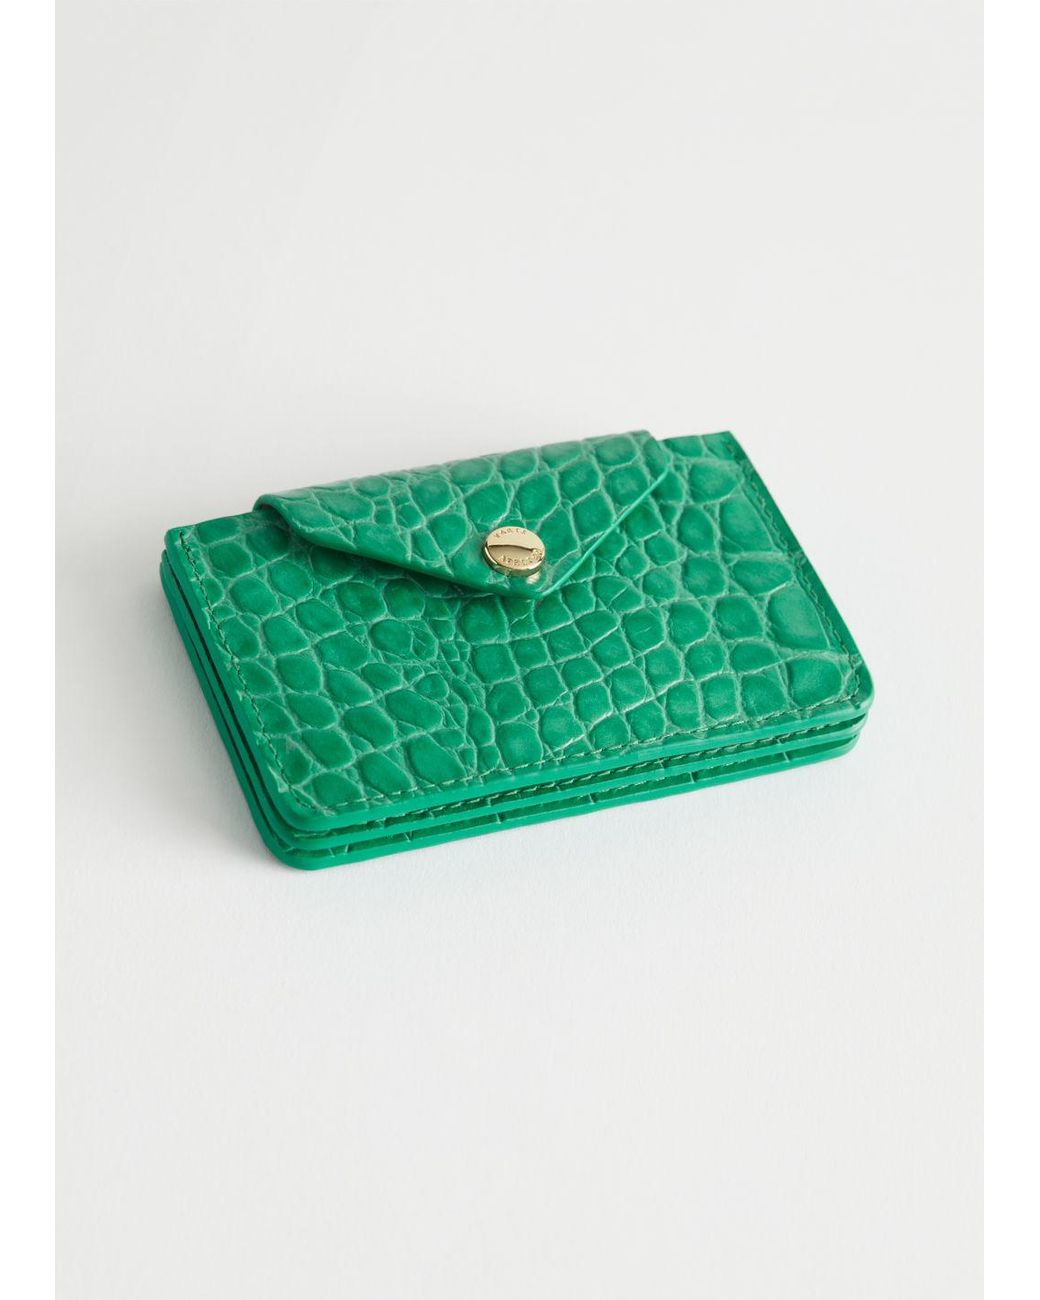 & Other Stories Leather Card Holder in Green | Lyst Canada